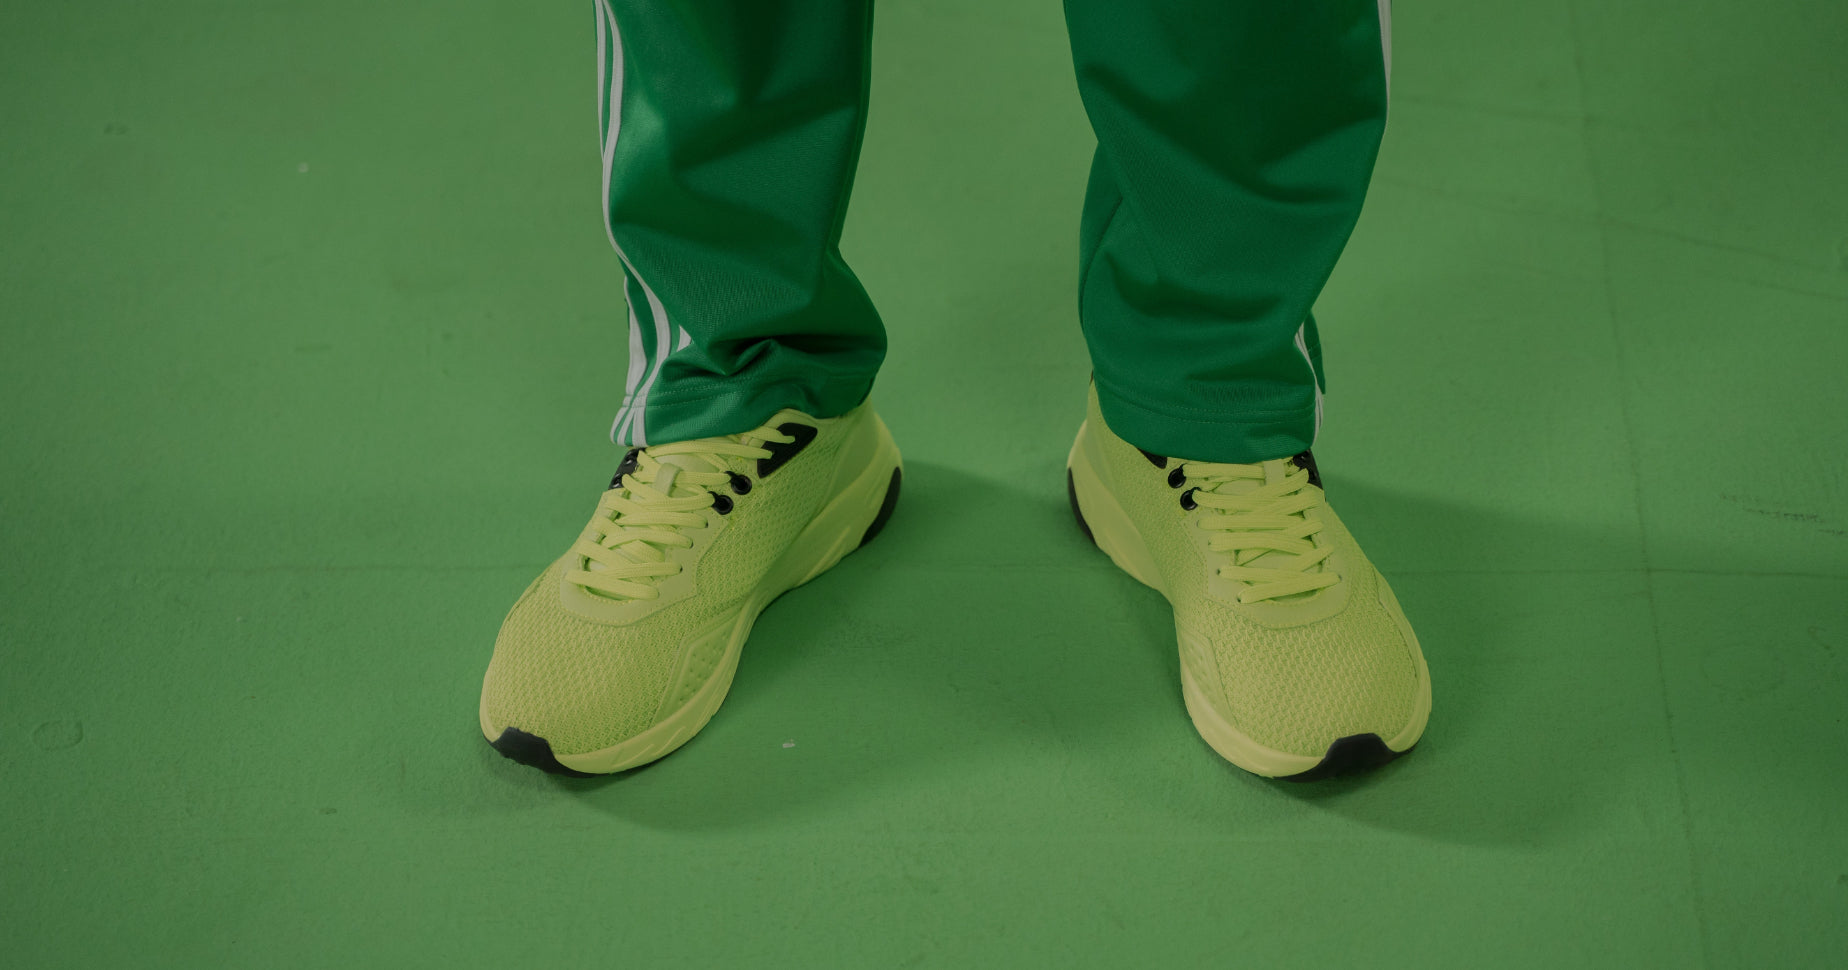 Crop of a person's legs and feet wearing green clothing